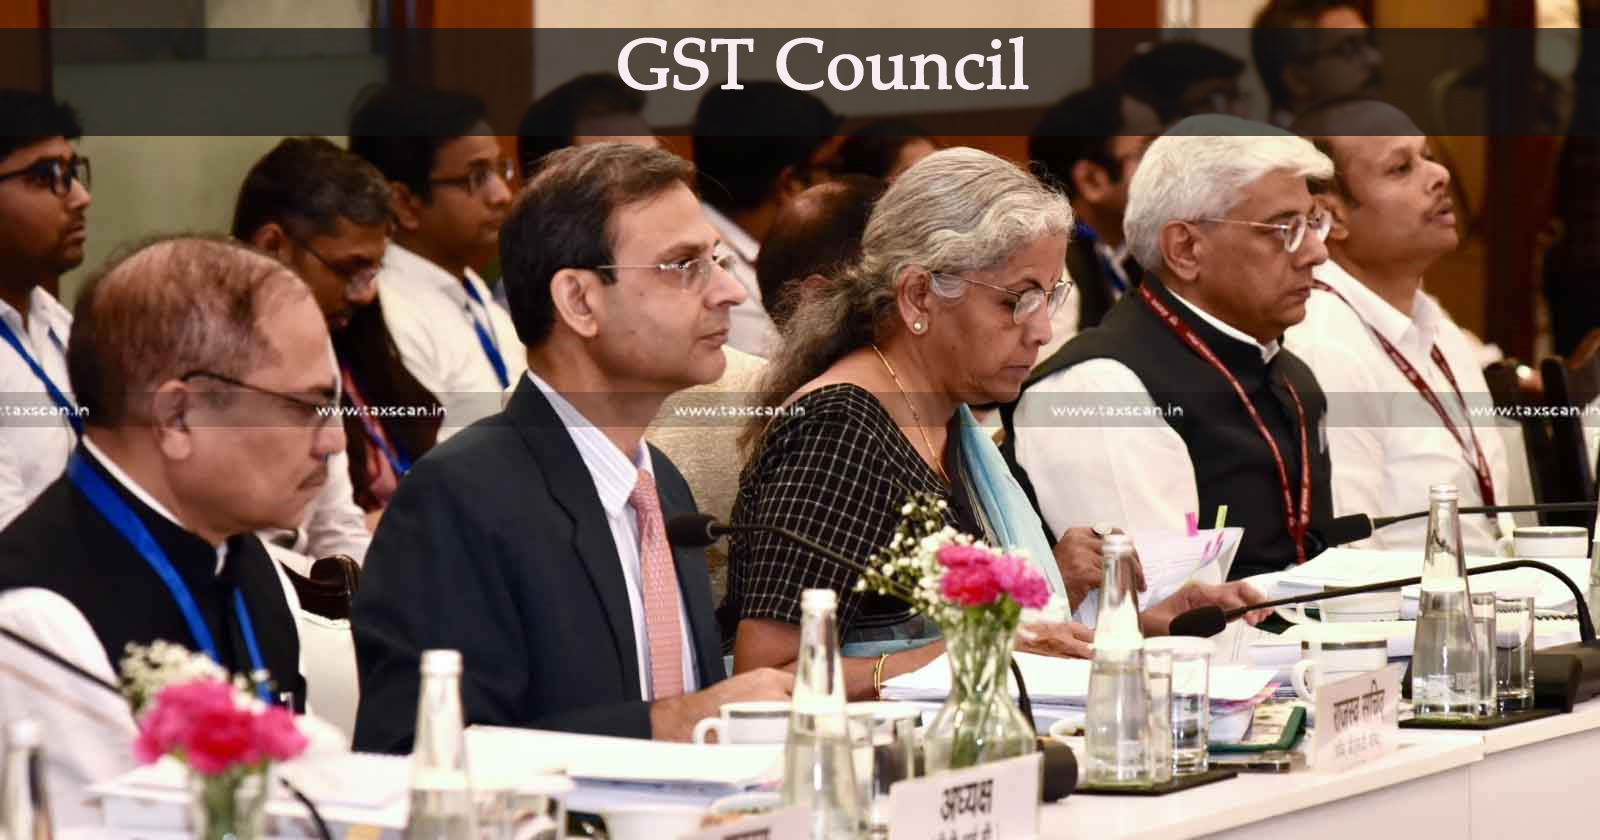 Provisional Attachment - GST Valid for One Year - GST Council - GST - taxscan